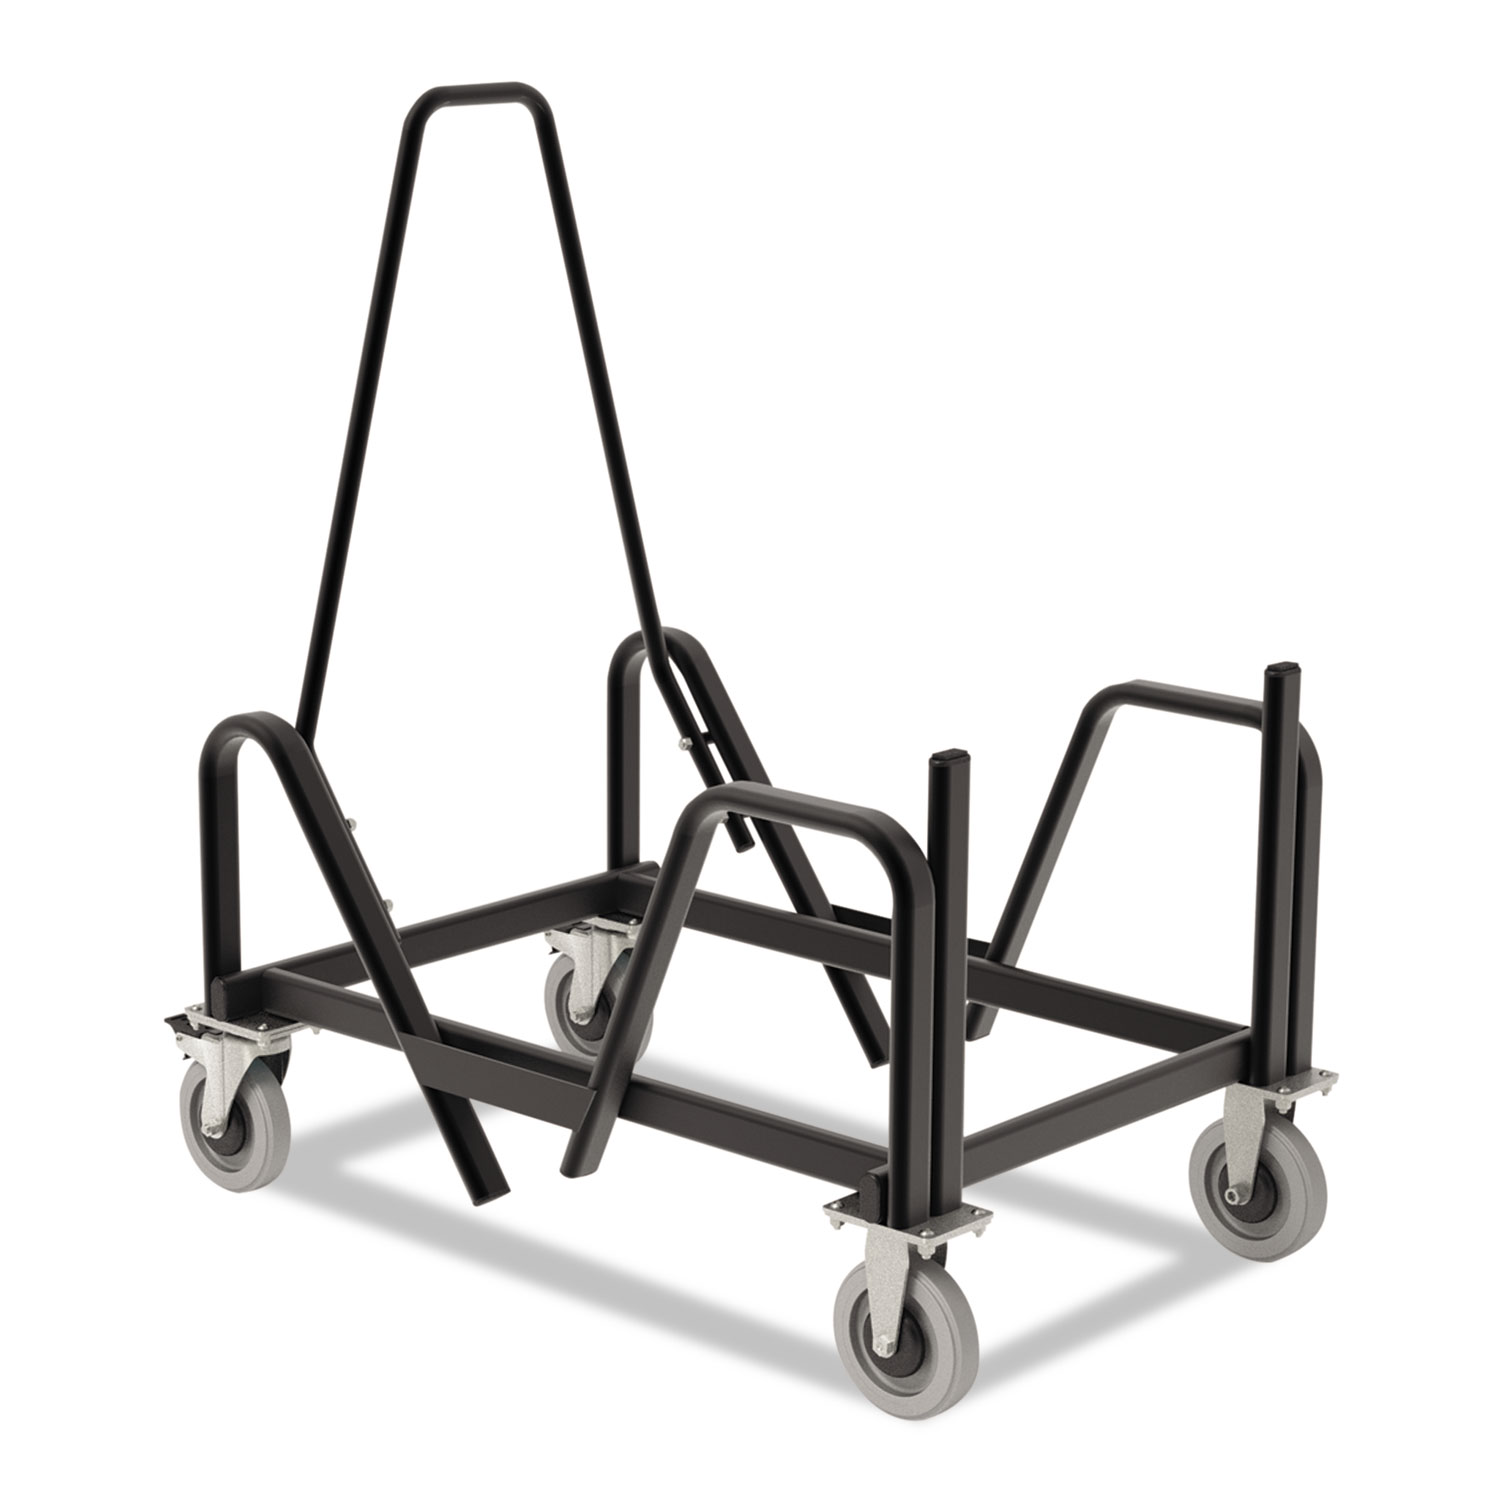 Motivate Seating Cart High-Density Stacking Chairs, 21-3/8 x 34-1/4 x 36-5/8,Blk